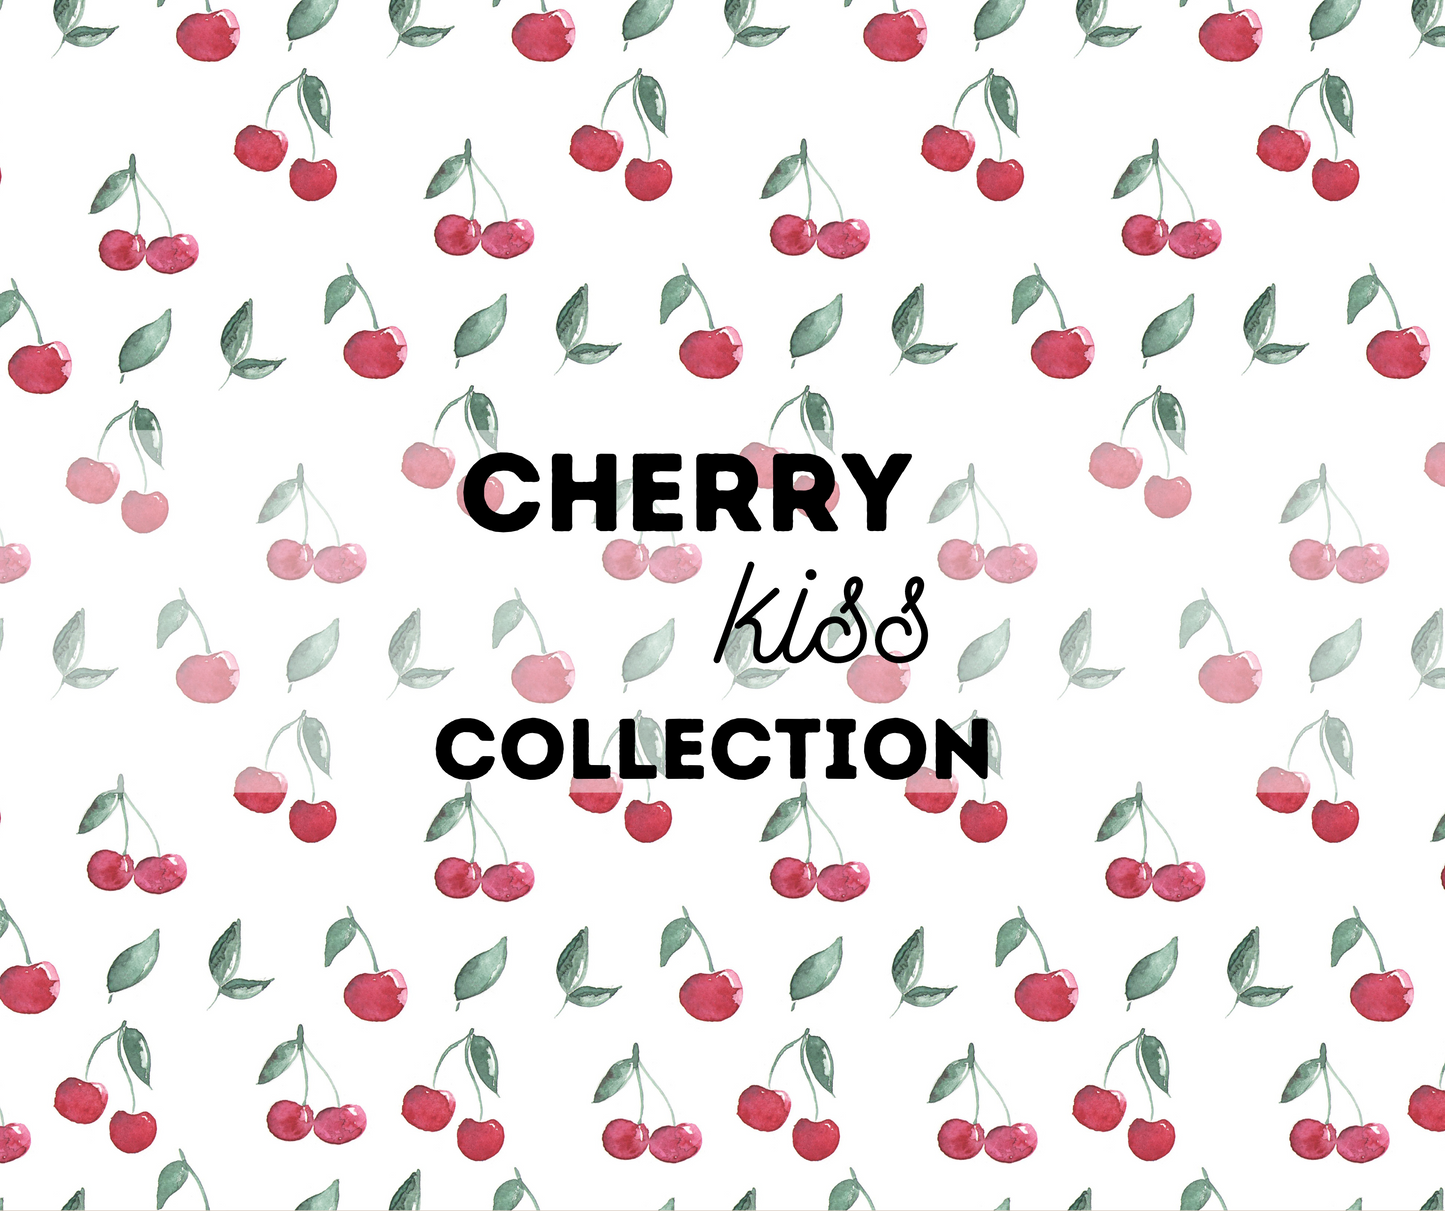 CHERRY KISS COLLECTION